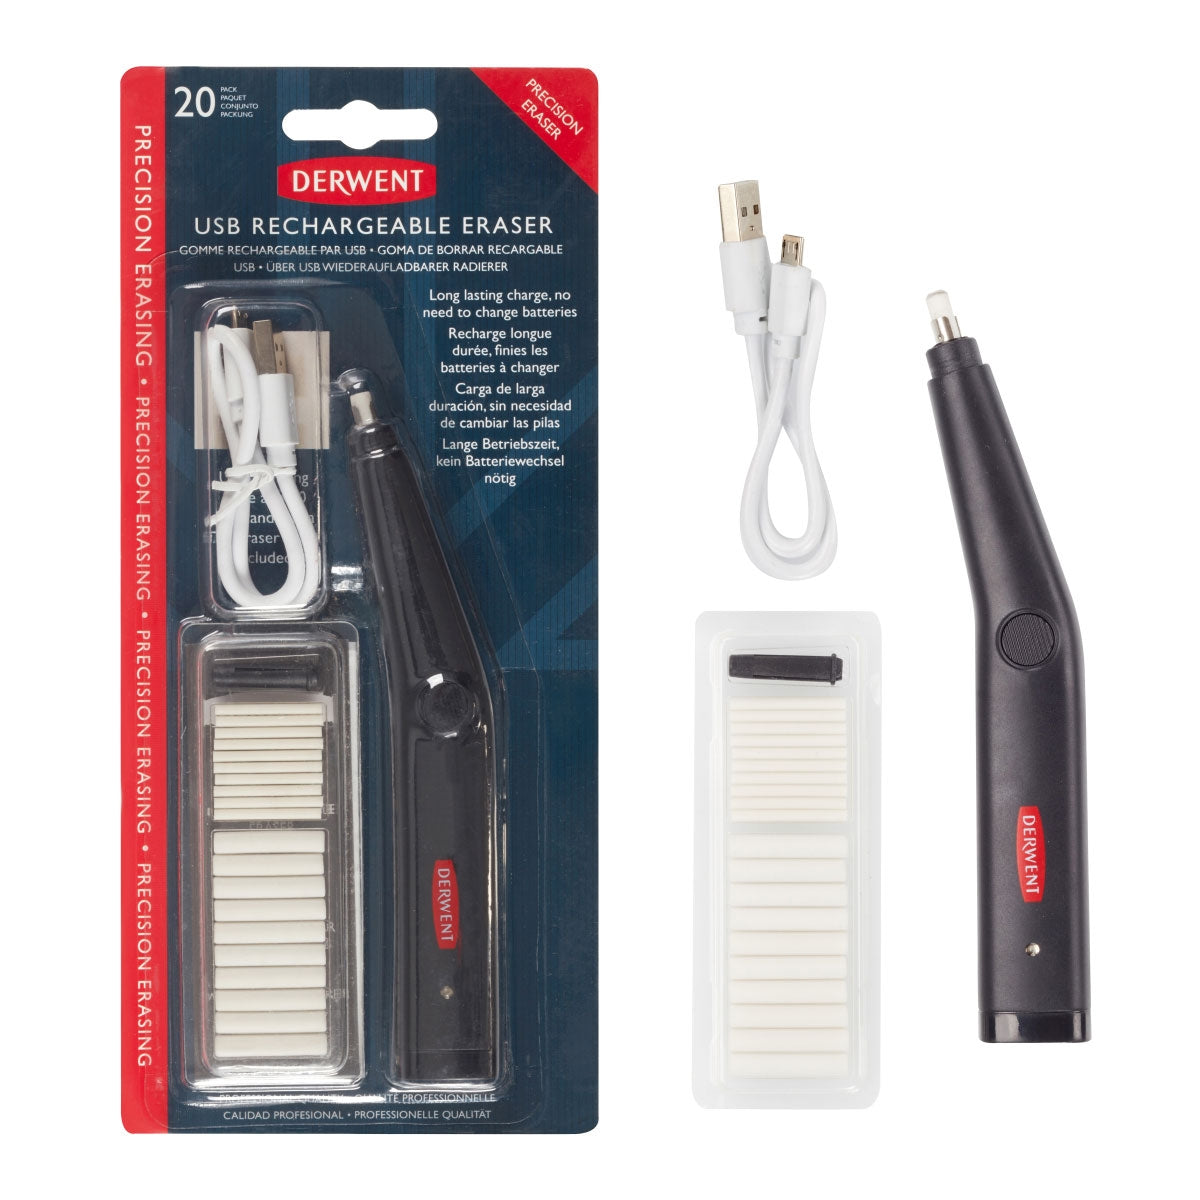 Derwent - USB Rechargeable Eraser (with Replacements)